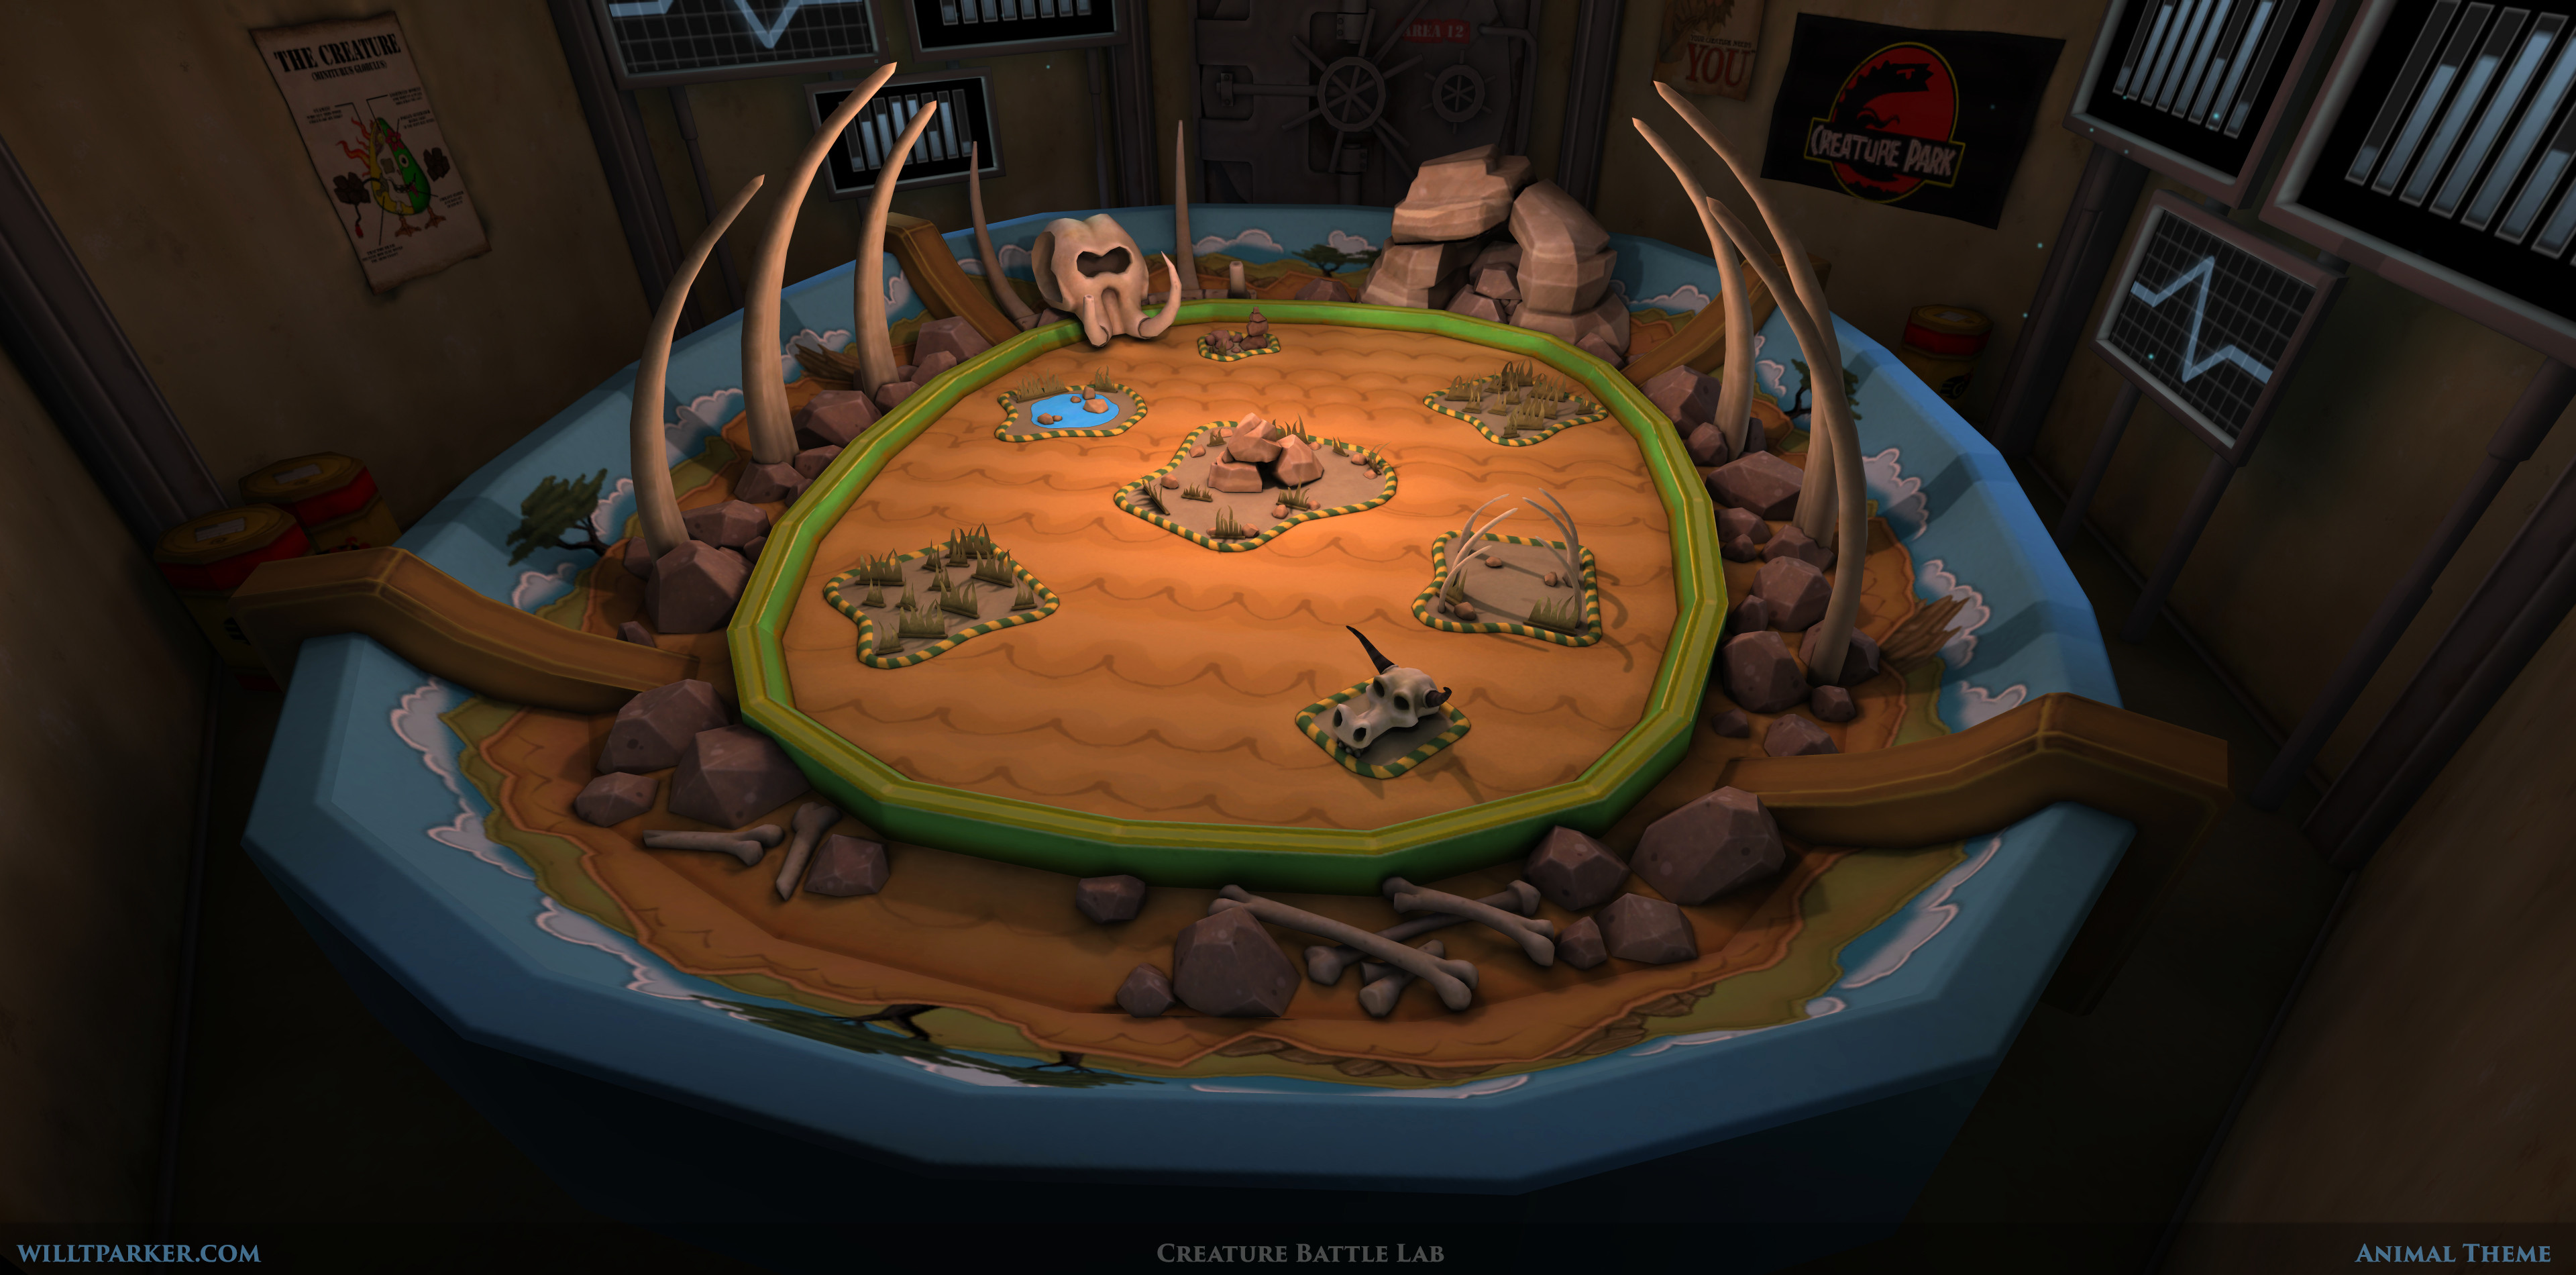 Lighting, modelling and texturing of all assets on outer ring of arena (excluding large ivory tusks and cave), authored several models in main ring of arena.